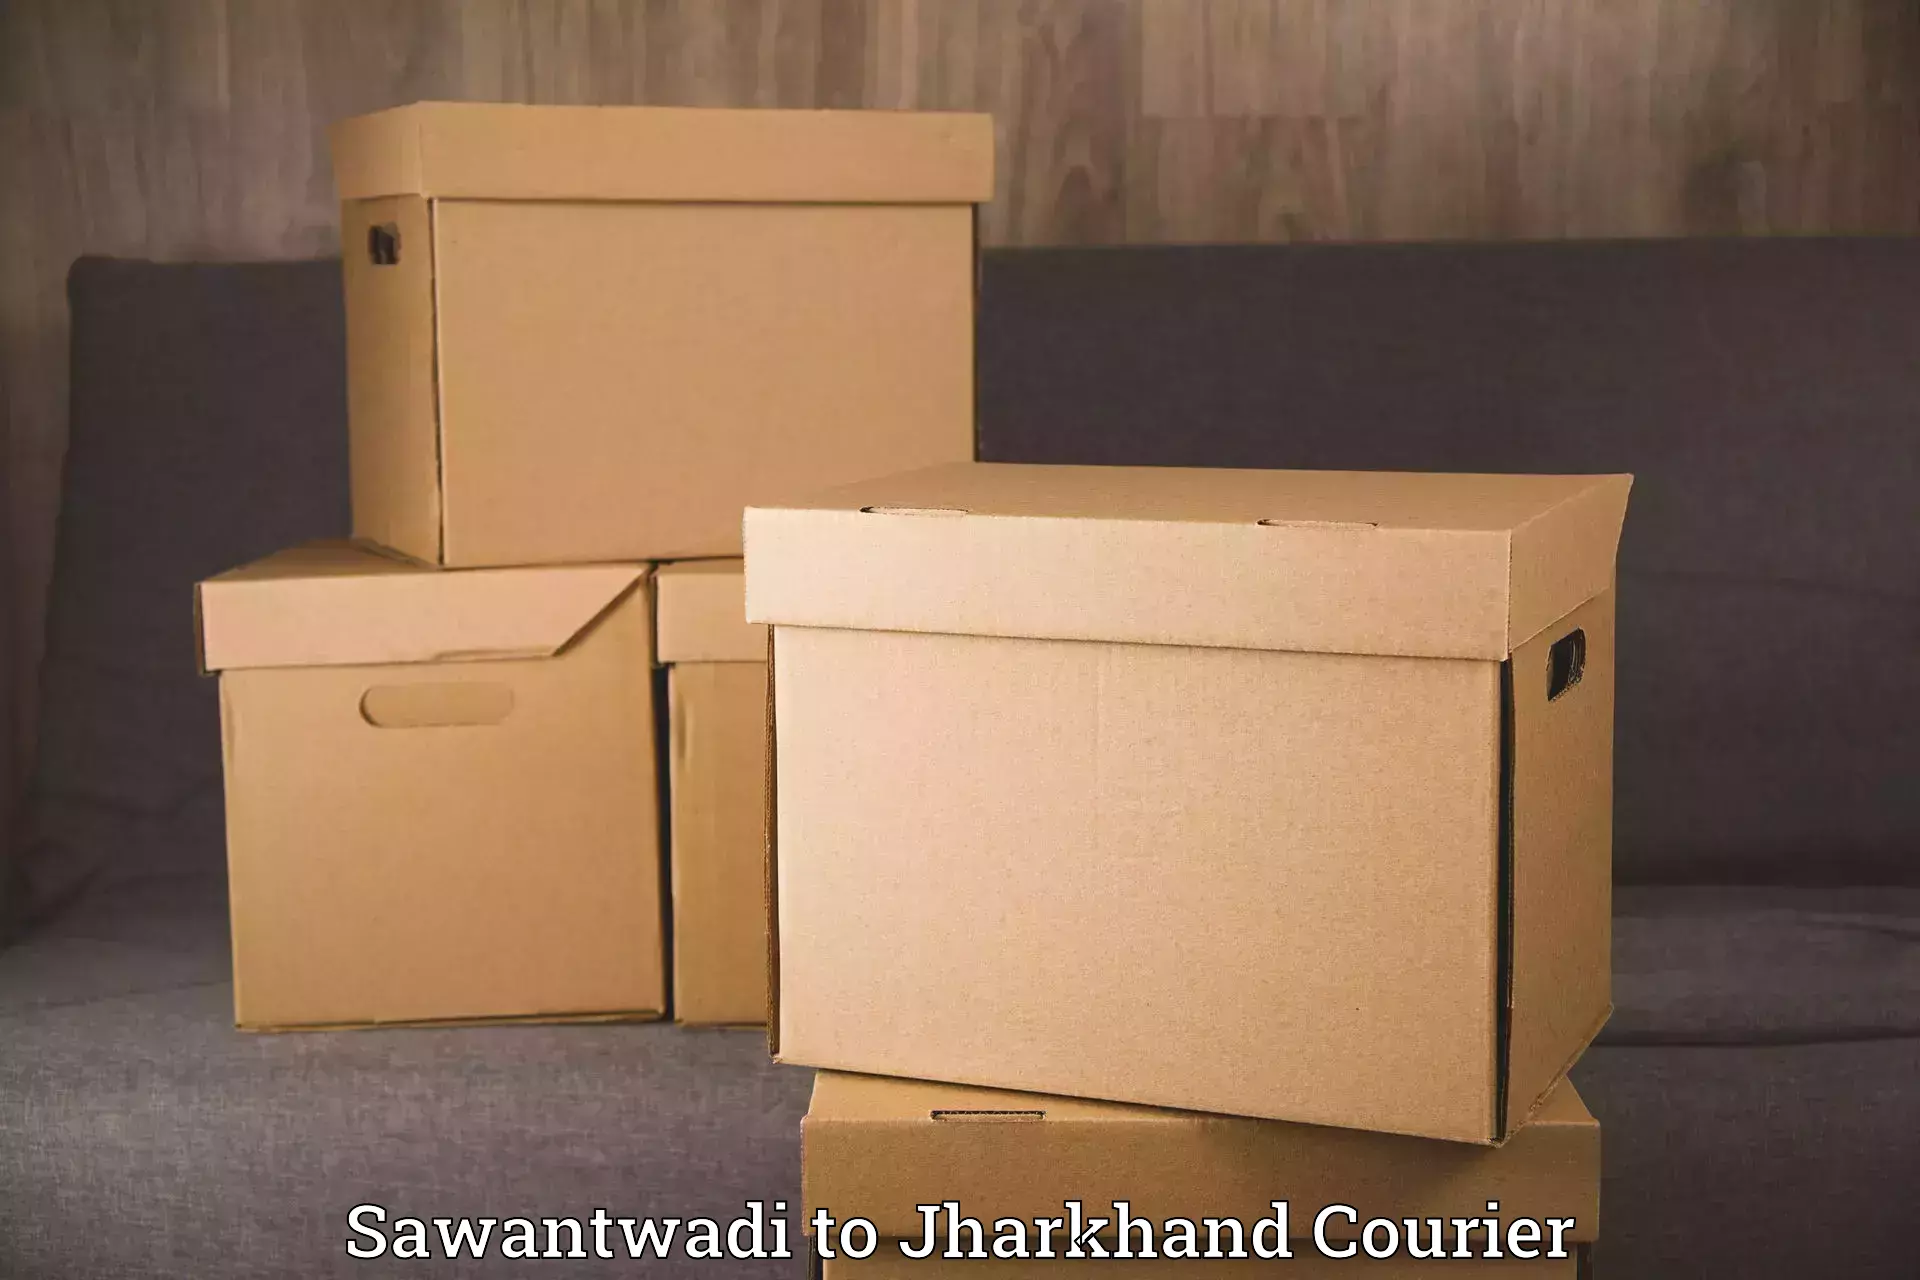 Moving and packing experts Sawantwadi to Chatra